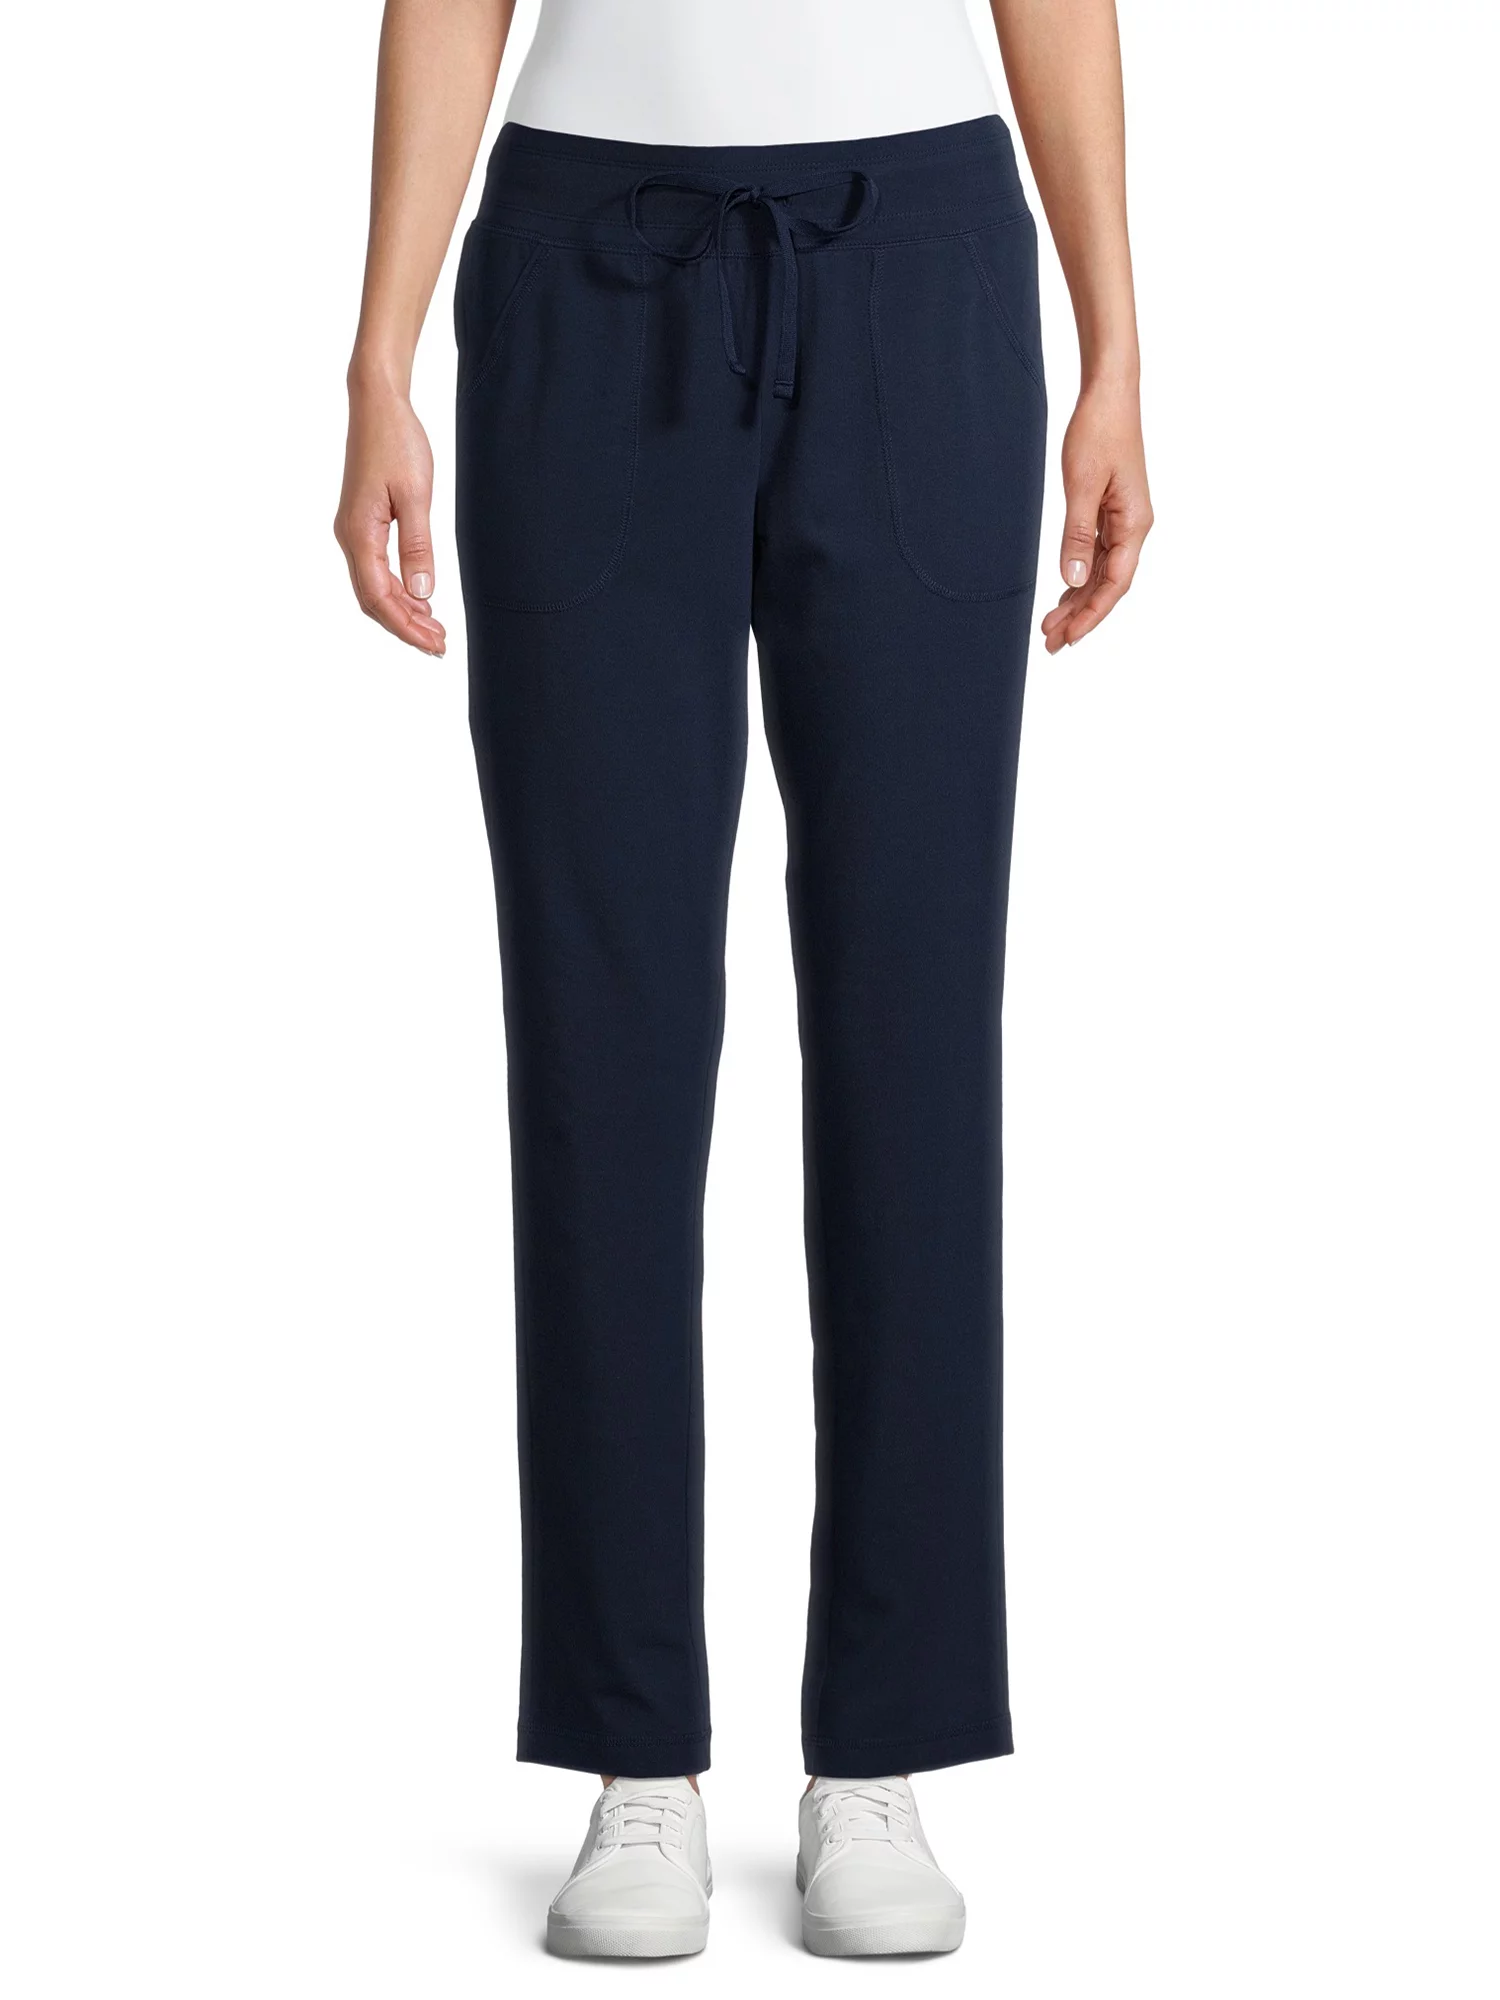 Athletic Works, Pants & Jumpsuits, Athletic Works Womens Core Knit Pants